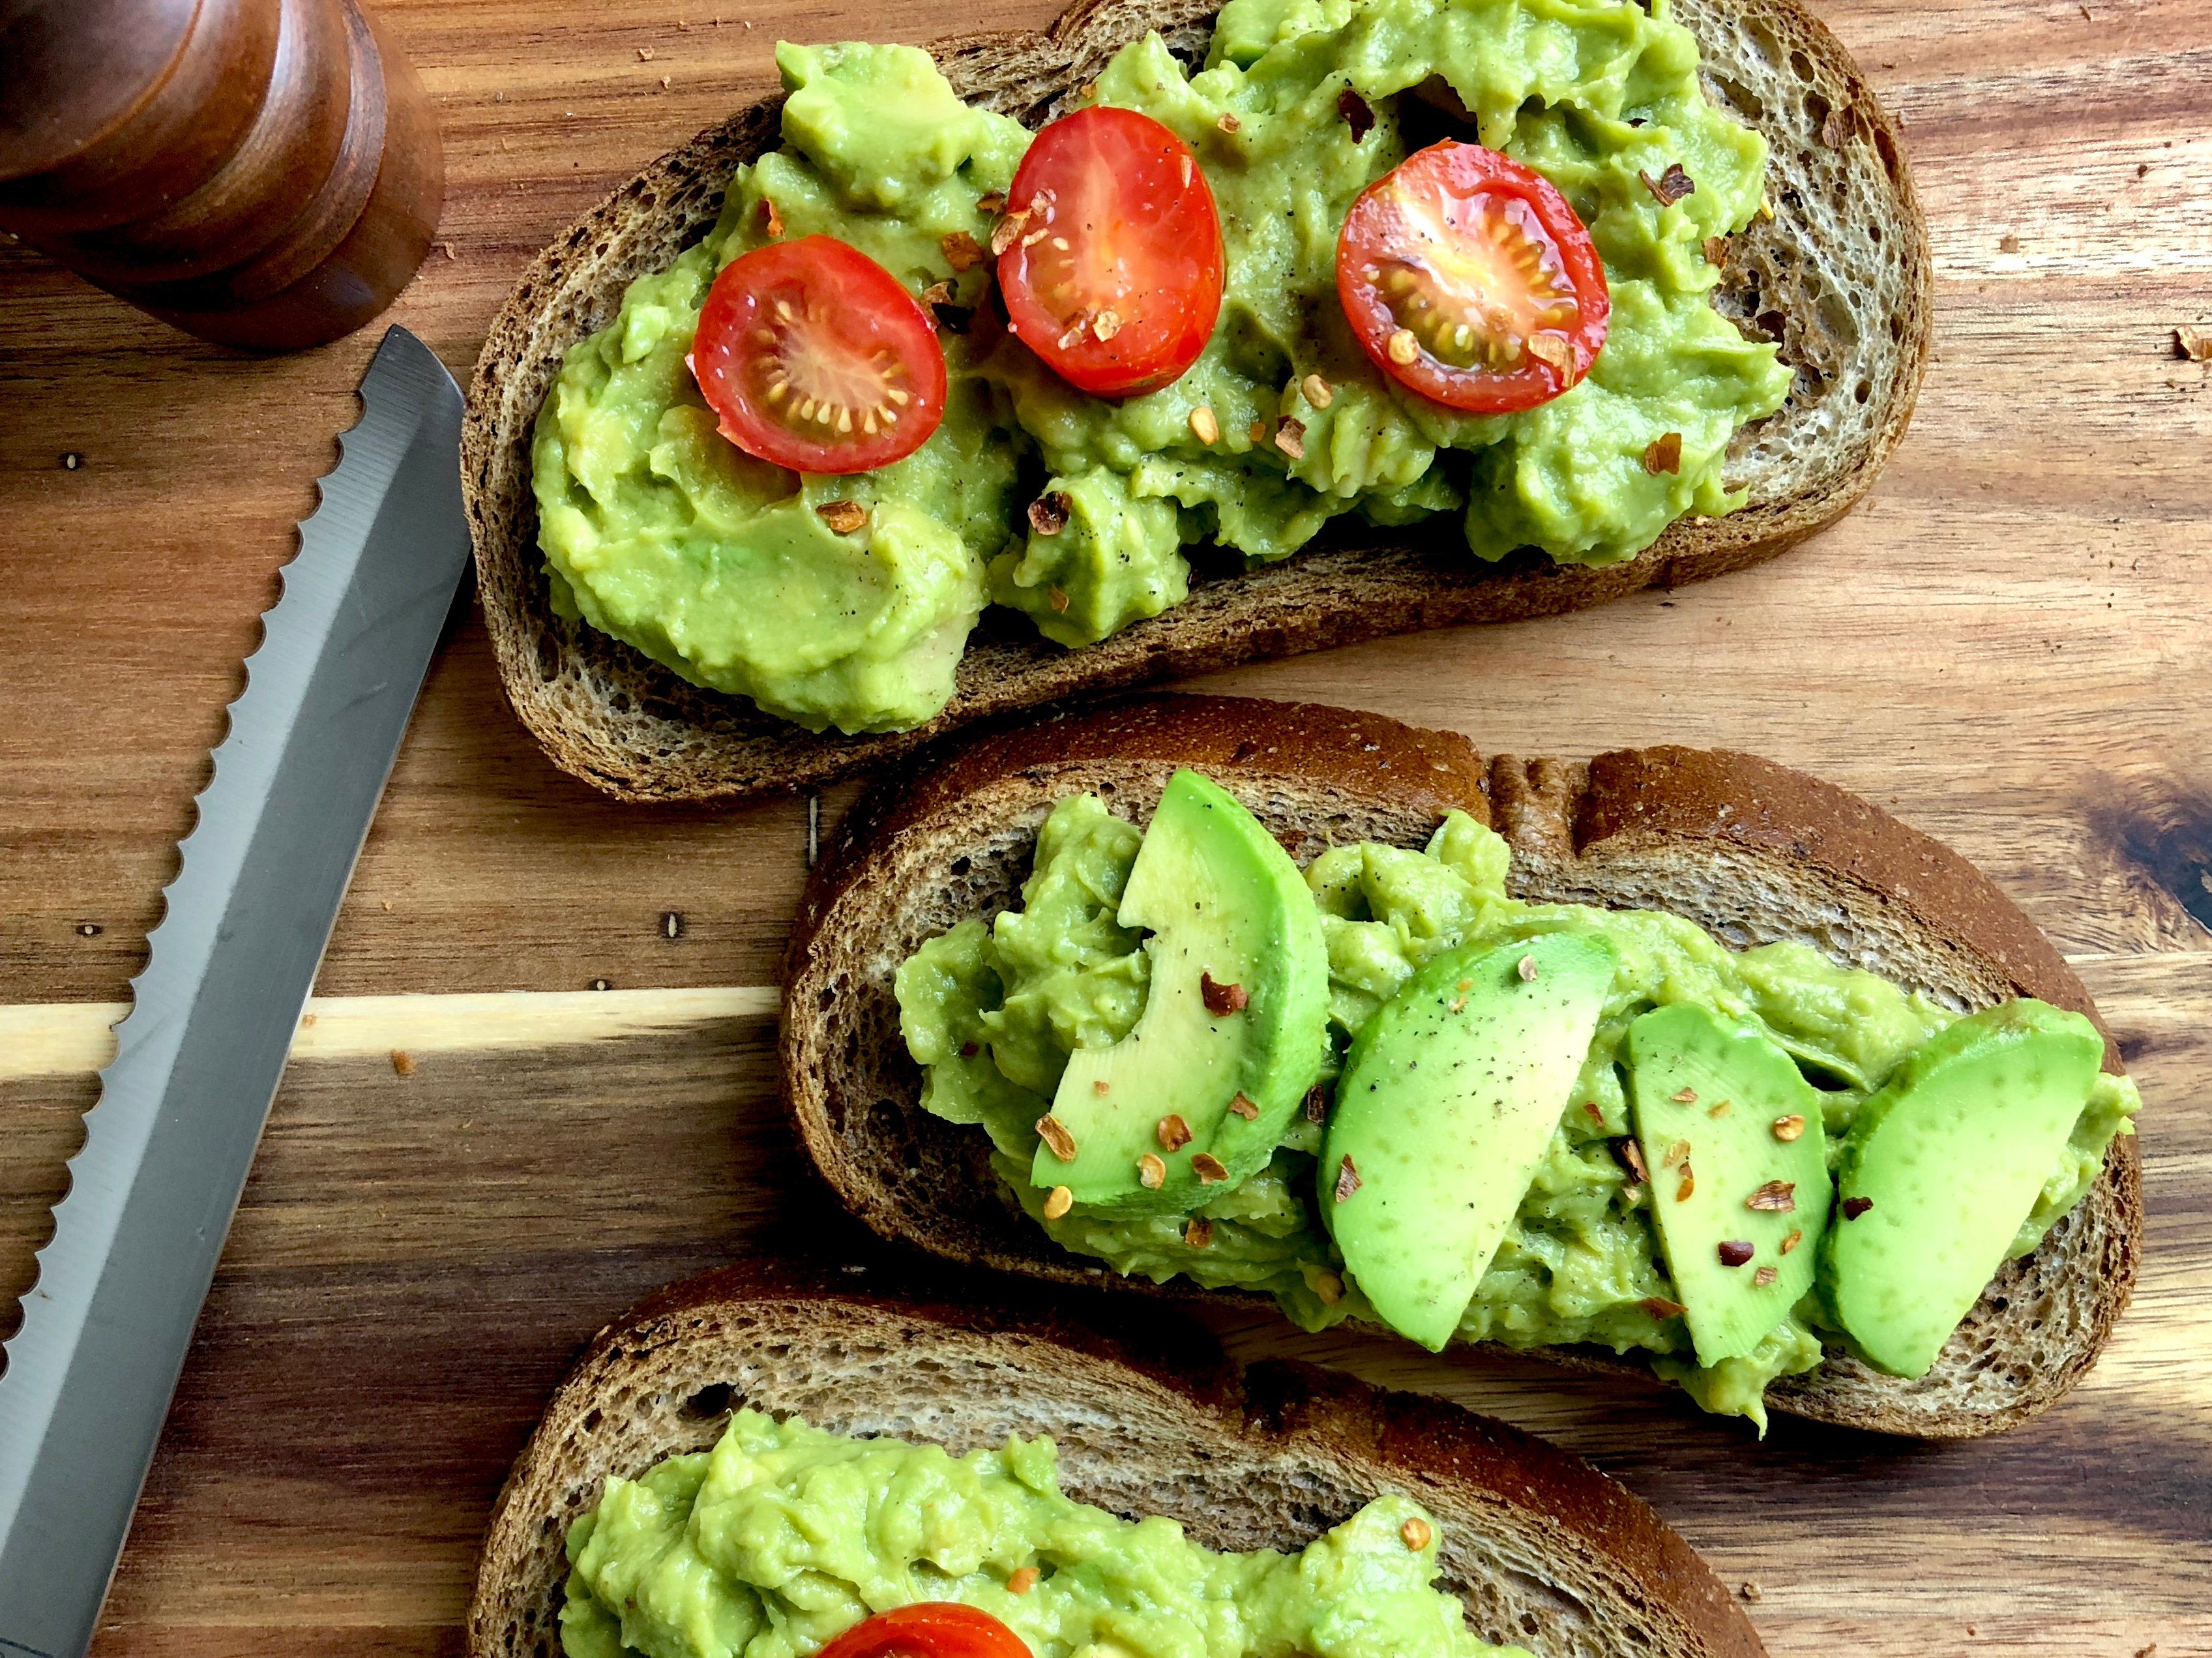 Top view of avocado toast on a wood cutting board